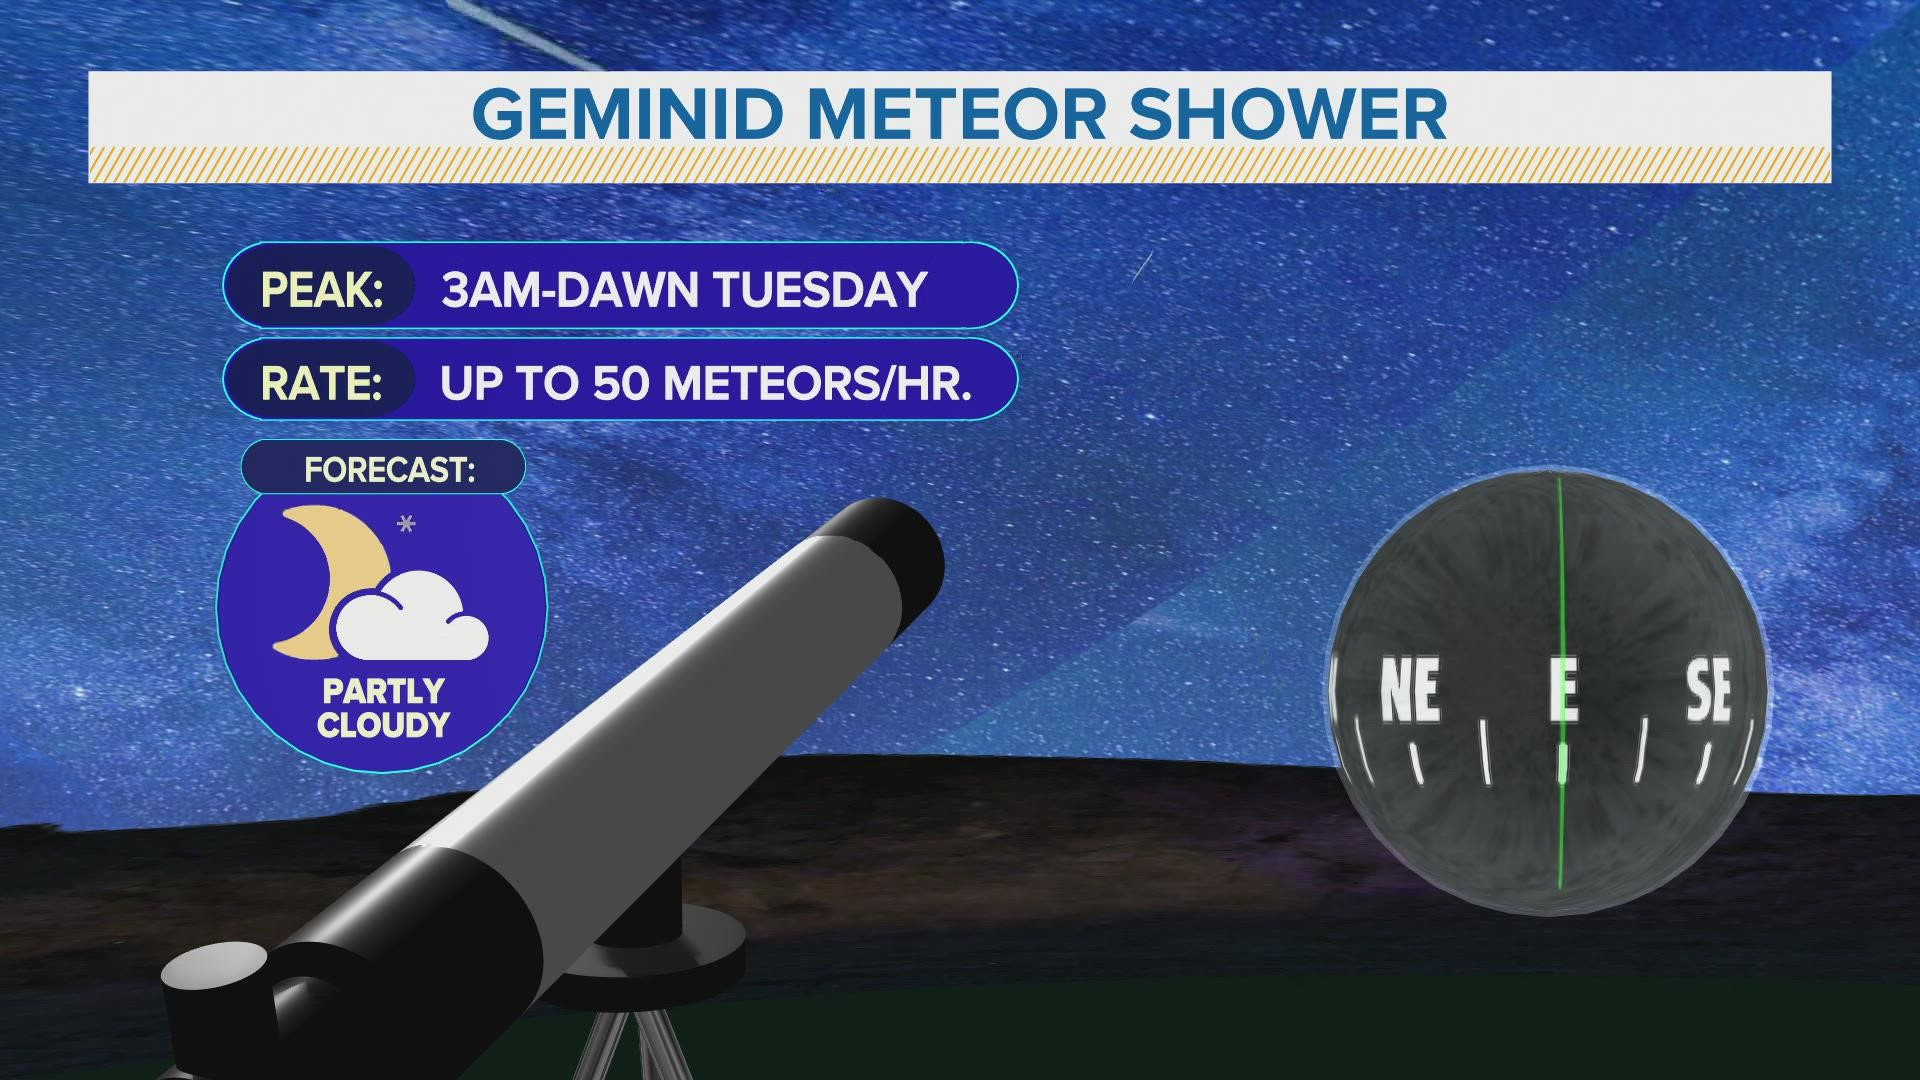 Up to 50 meteors per hour will be possible, but there will be some clouds around here in Iowa.